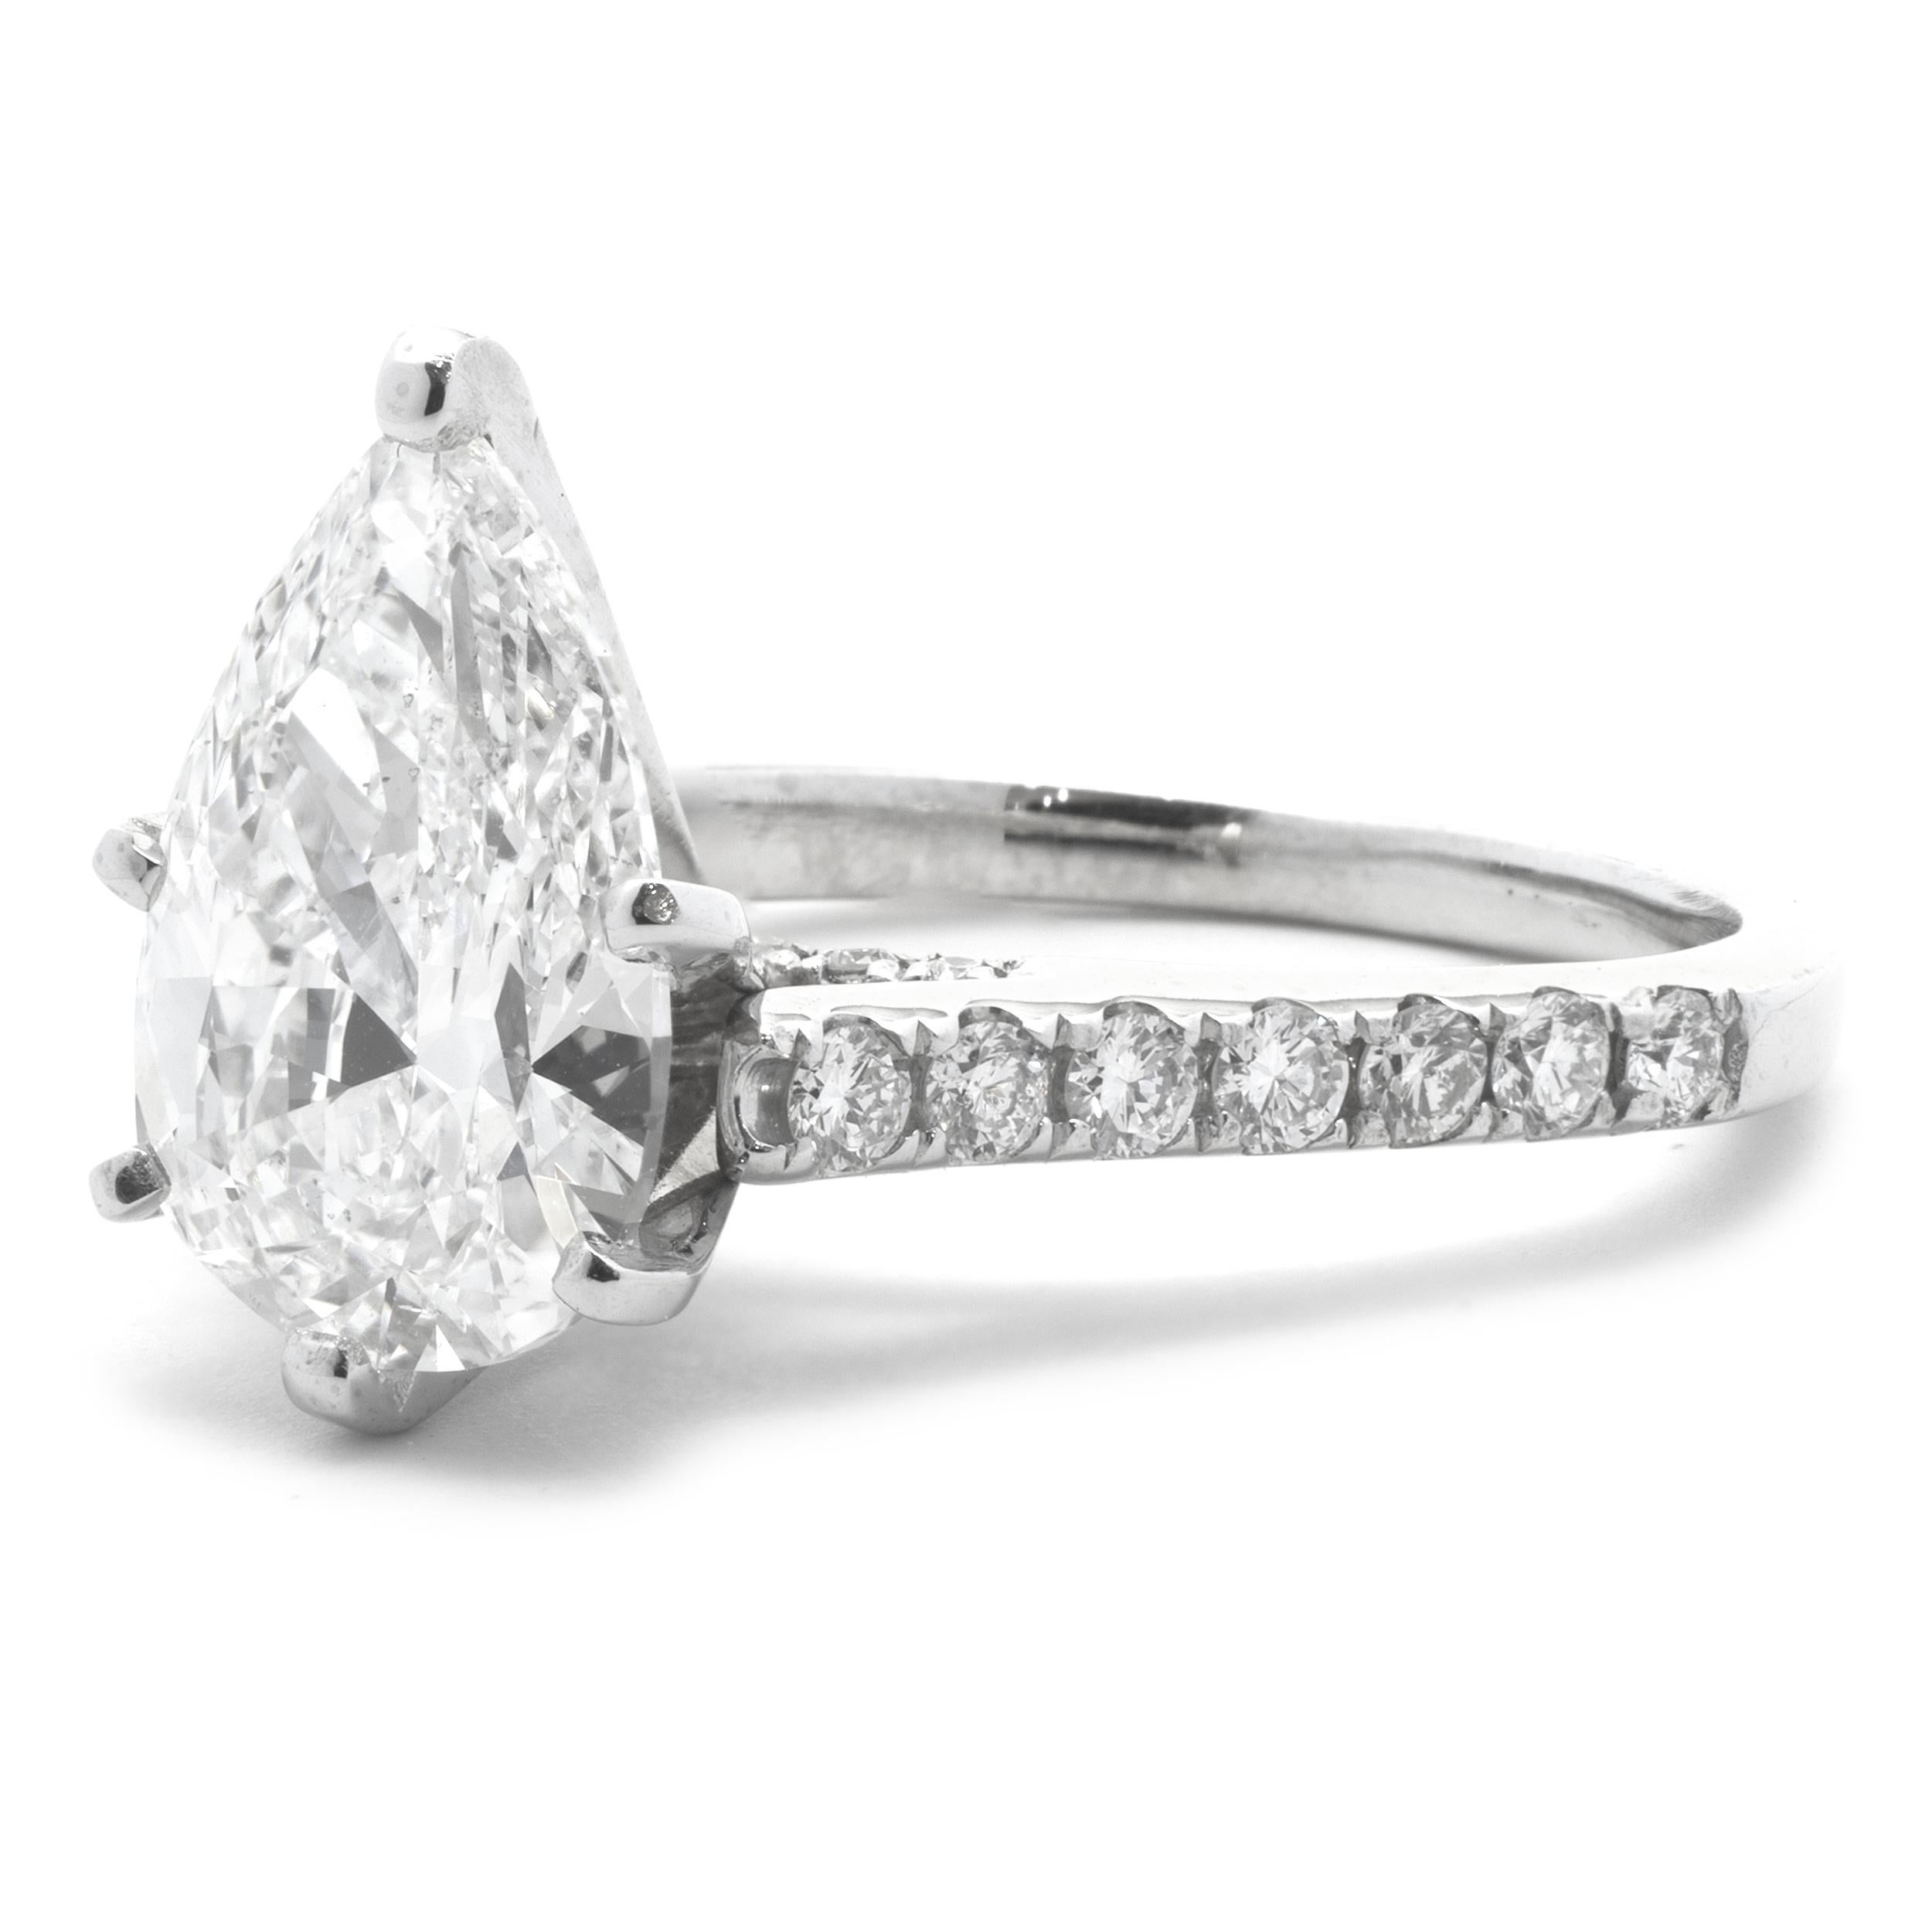 14 Karat White Gold Pear Cut Diamond Engagement Ring In Excellent Condition For Sale In Scottsdale, AZ